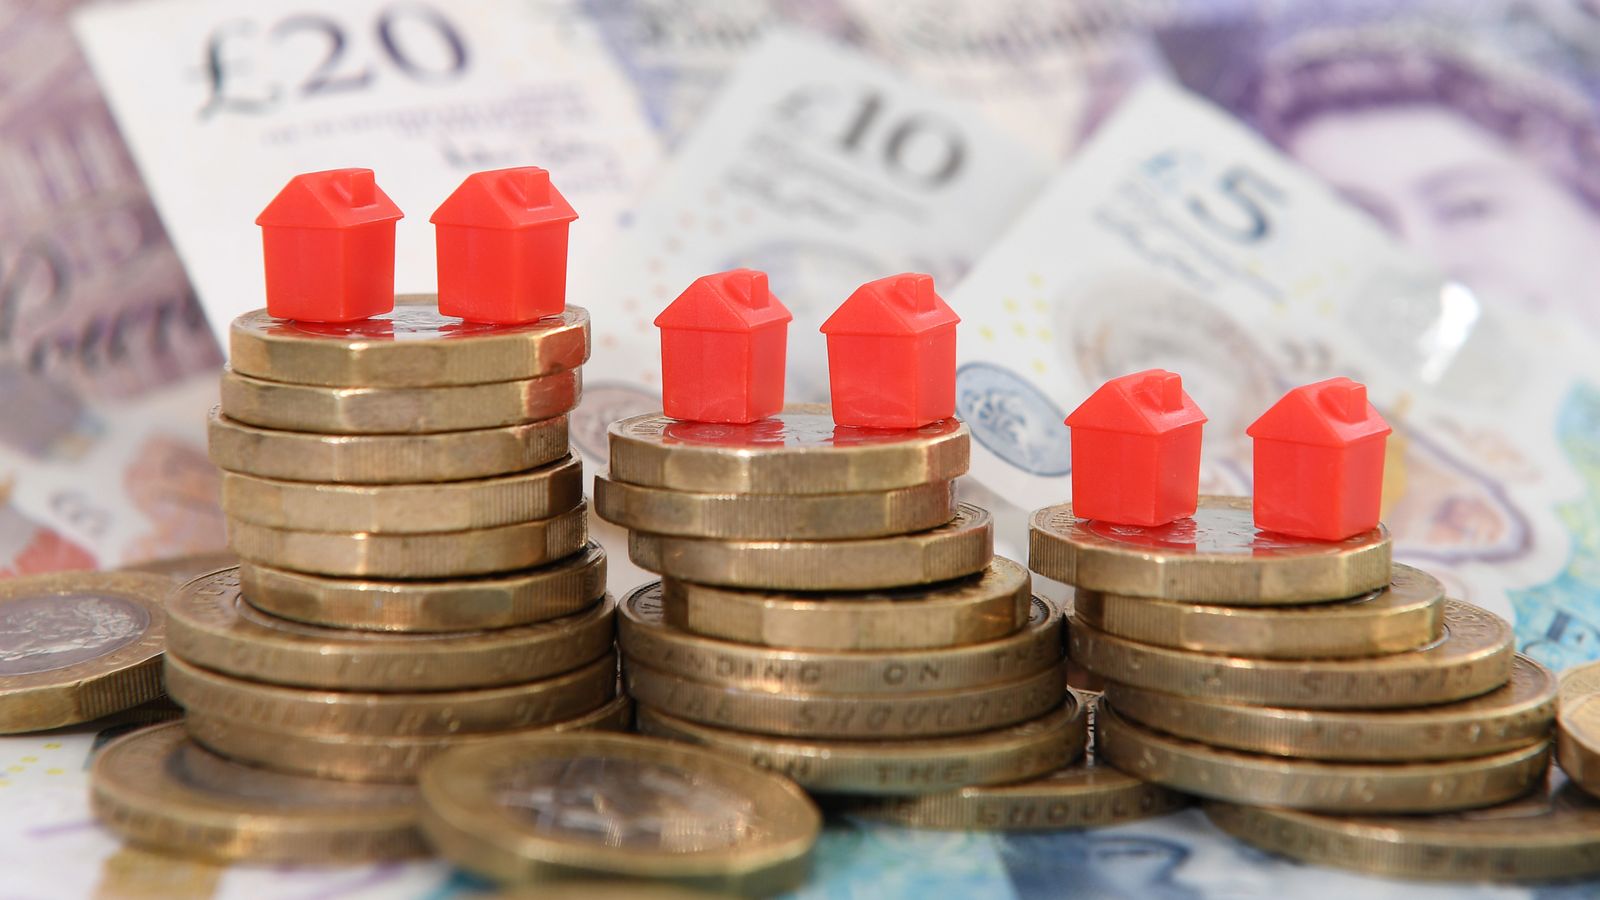 Mortgage approvals at lowest level since January, Bank of England figures reveal